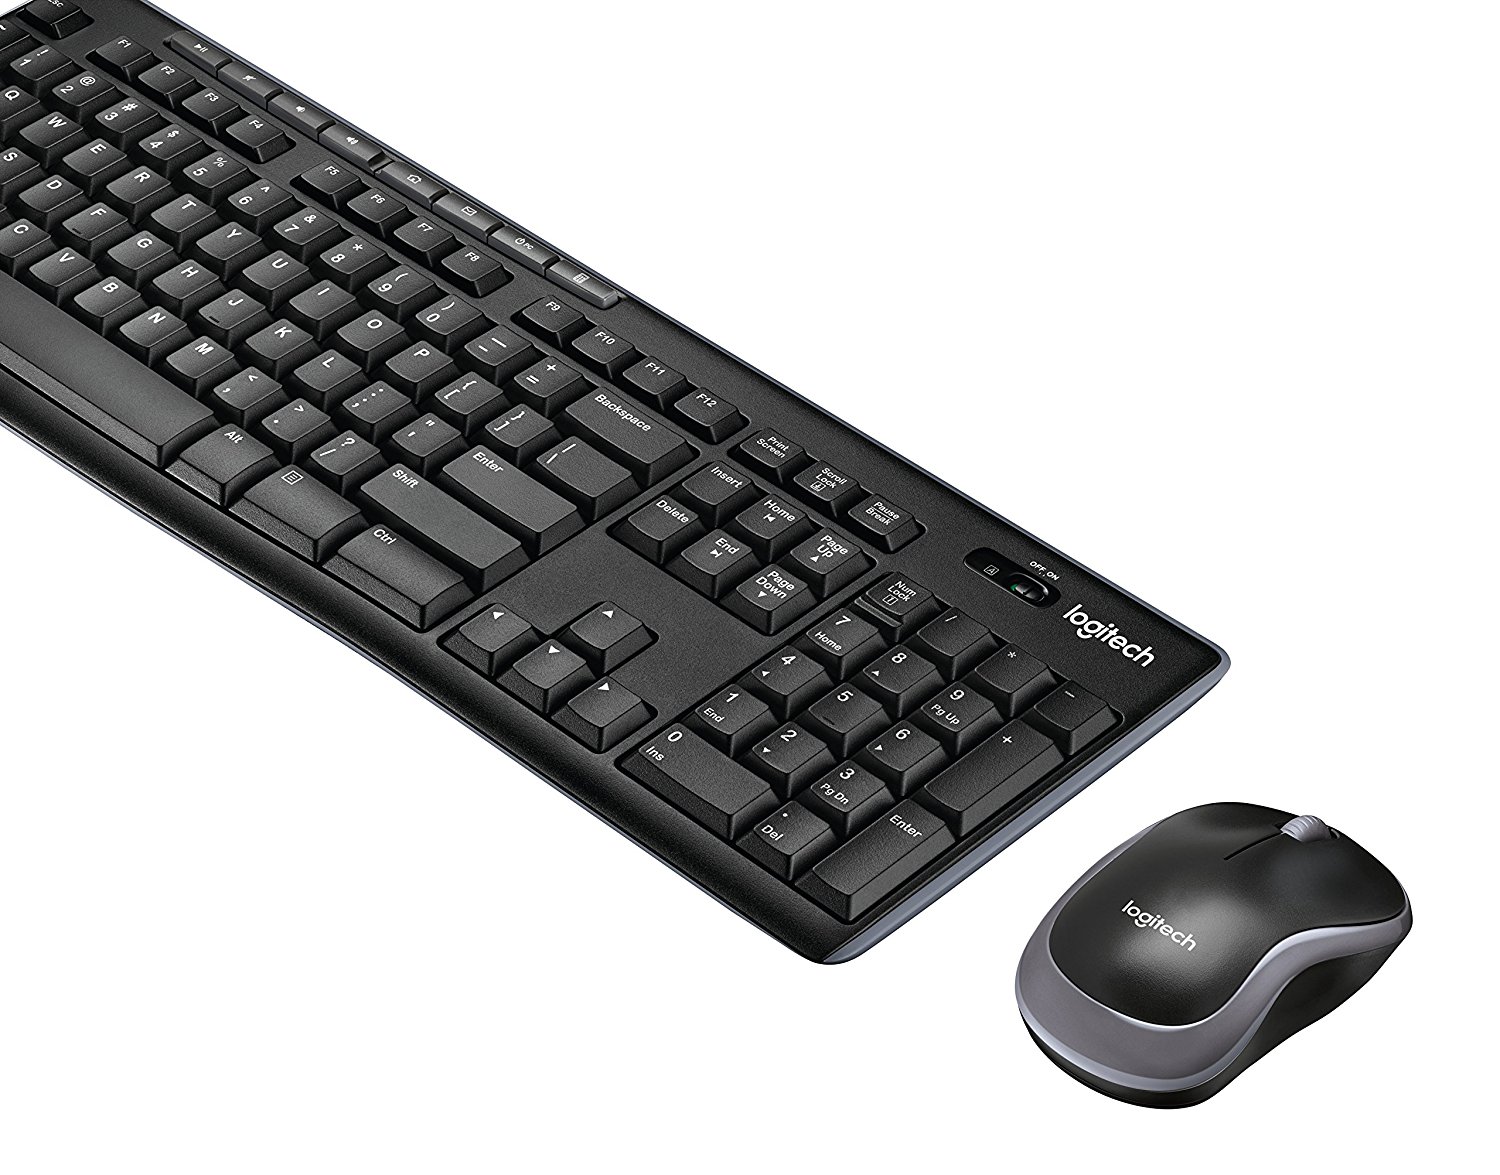 logitech wireless mouse and keyboard intermittent connection